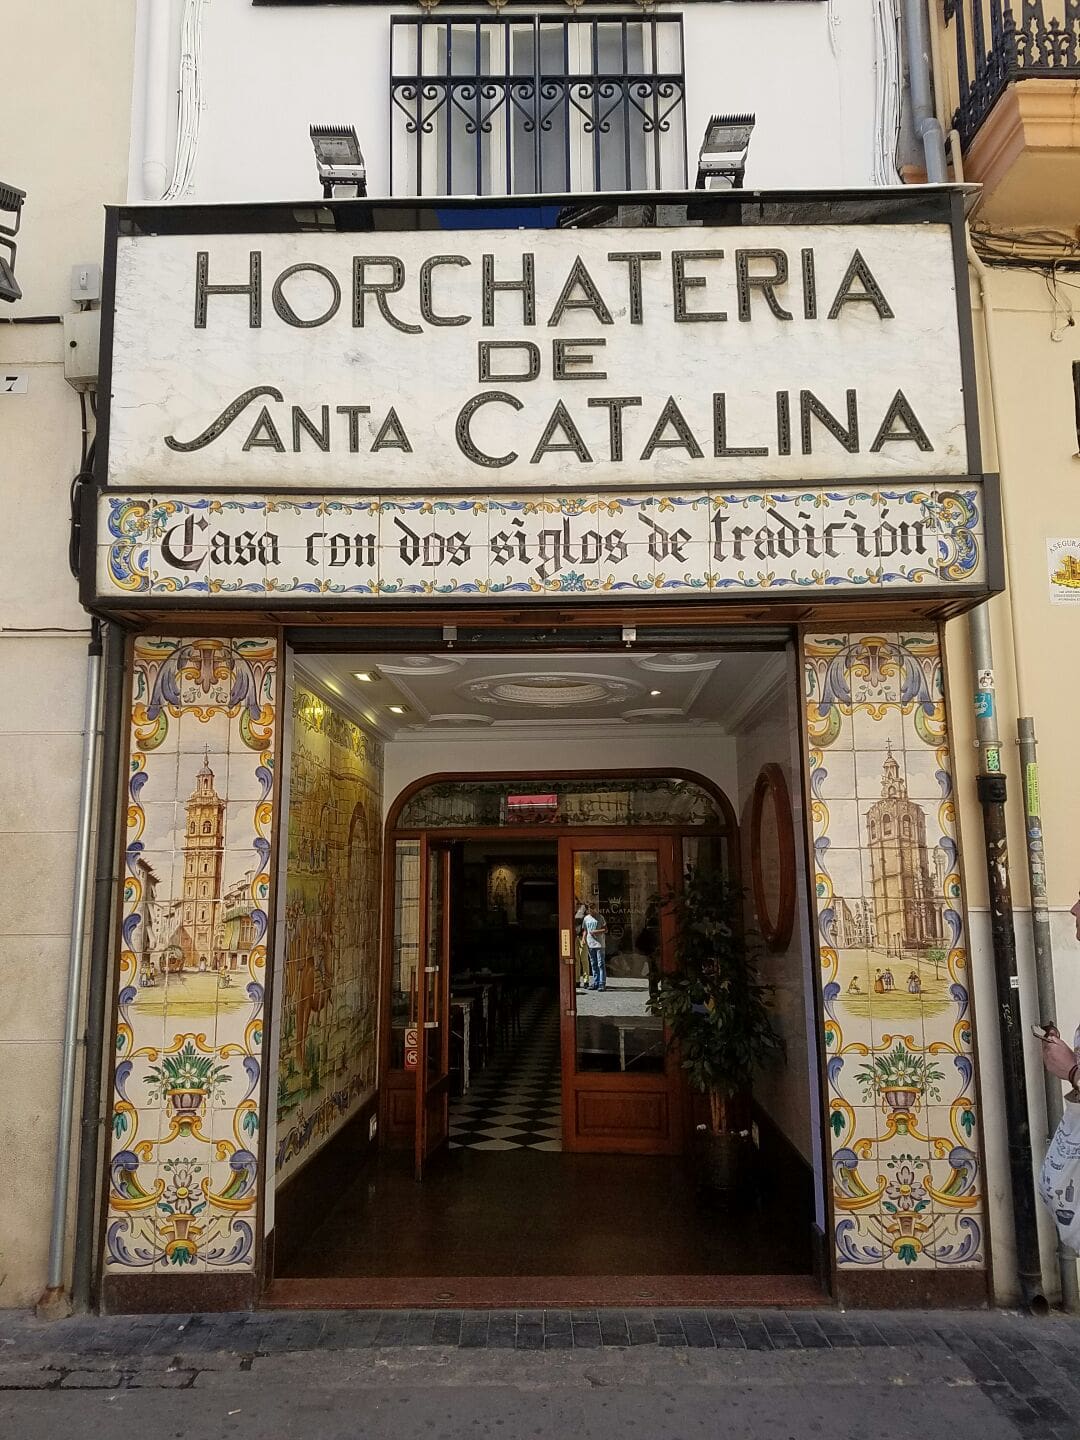 With a welcoming interior, delicious churros and a selection of chocolates to choose from, Horchatería Santa Catalina has to be involved in any conversation regarding churros in Valencia!